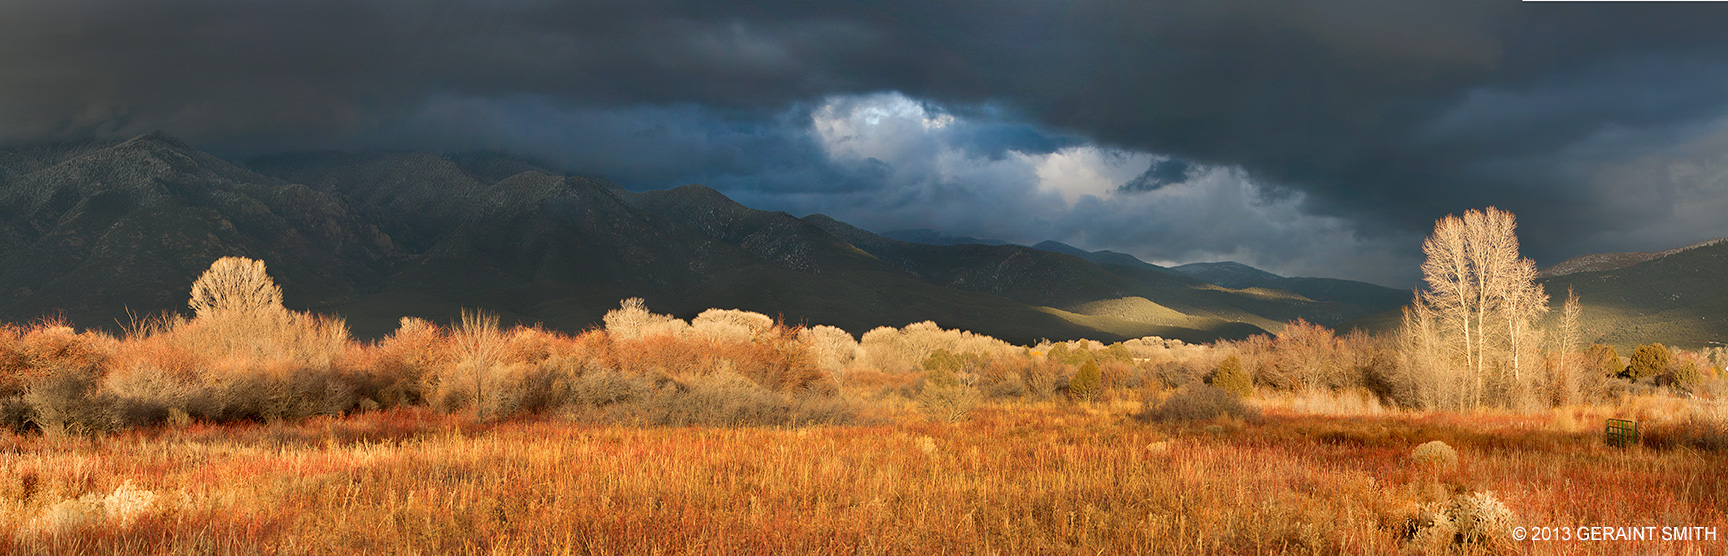 Across the meadow to the mountains, Taos New Mexico